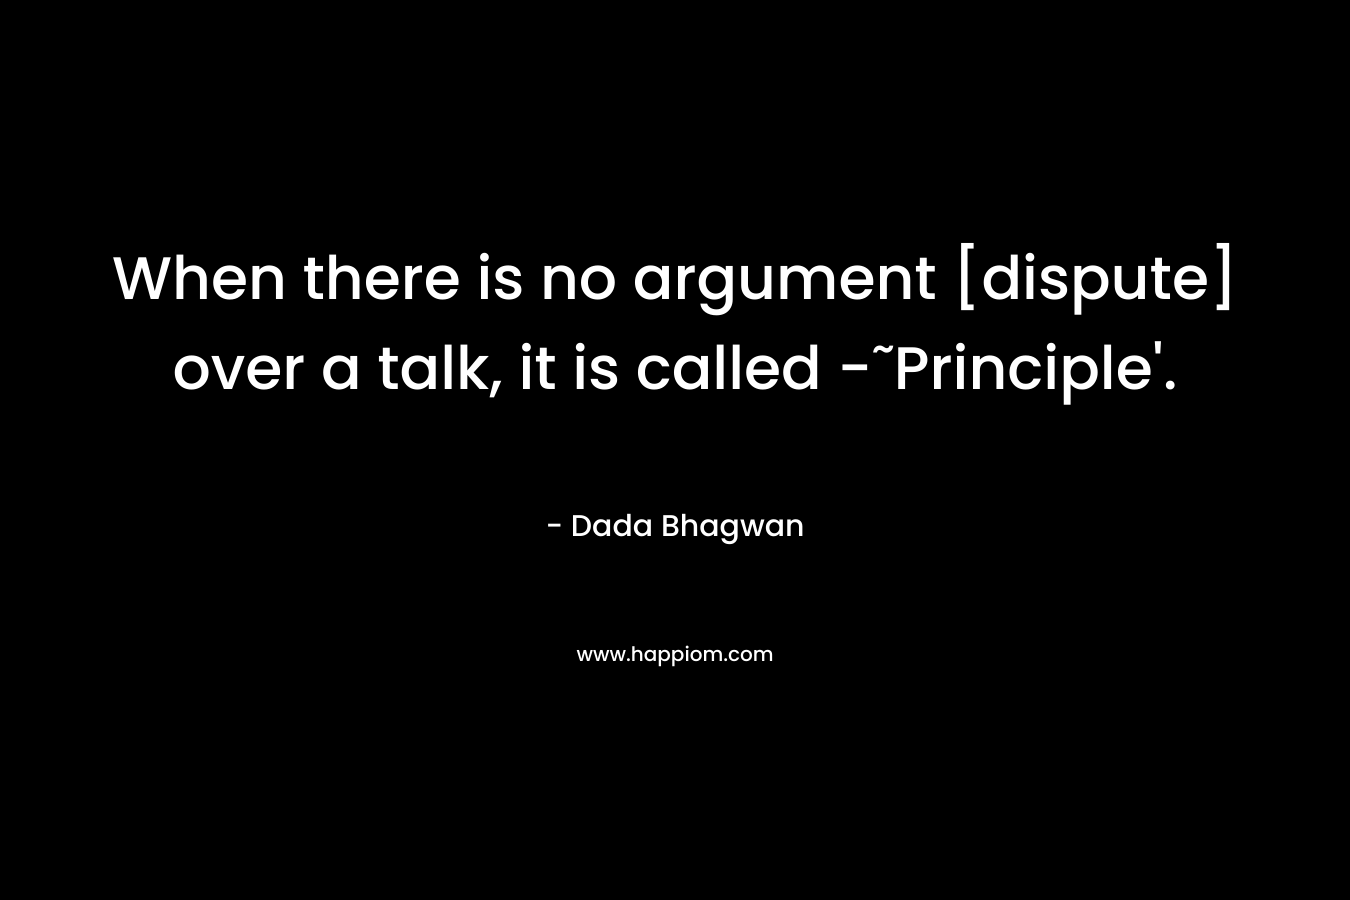 When there is no argument [dispute] over a talk, it is called -˜Principle'.